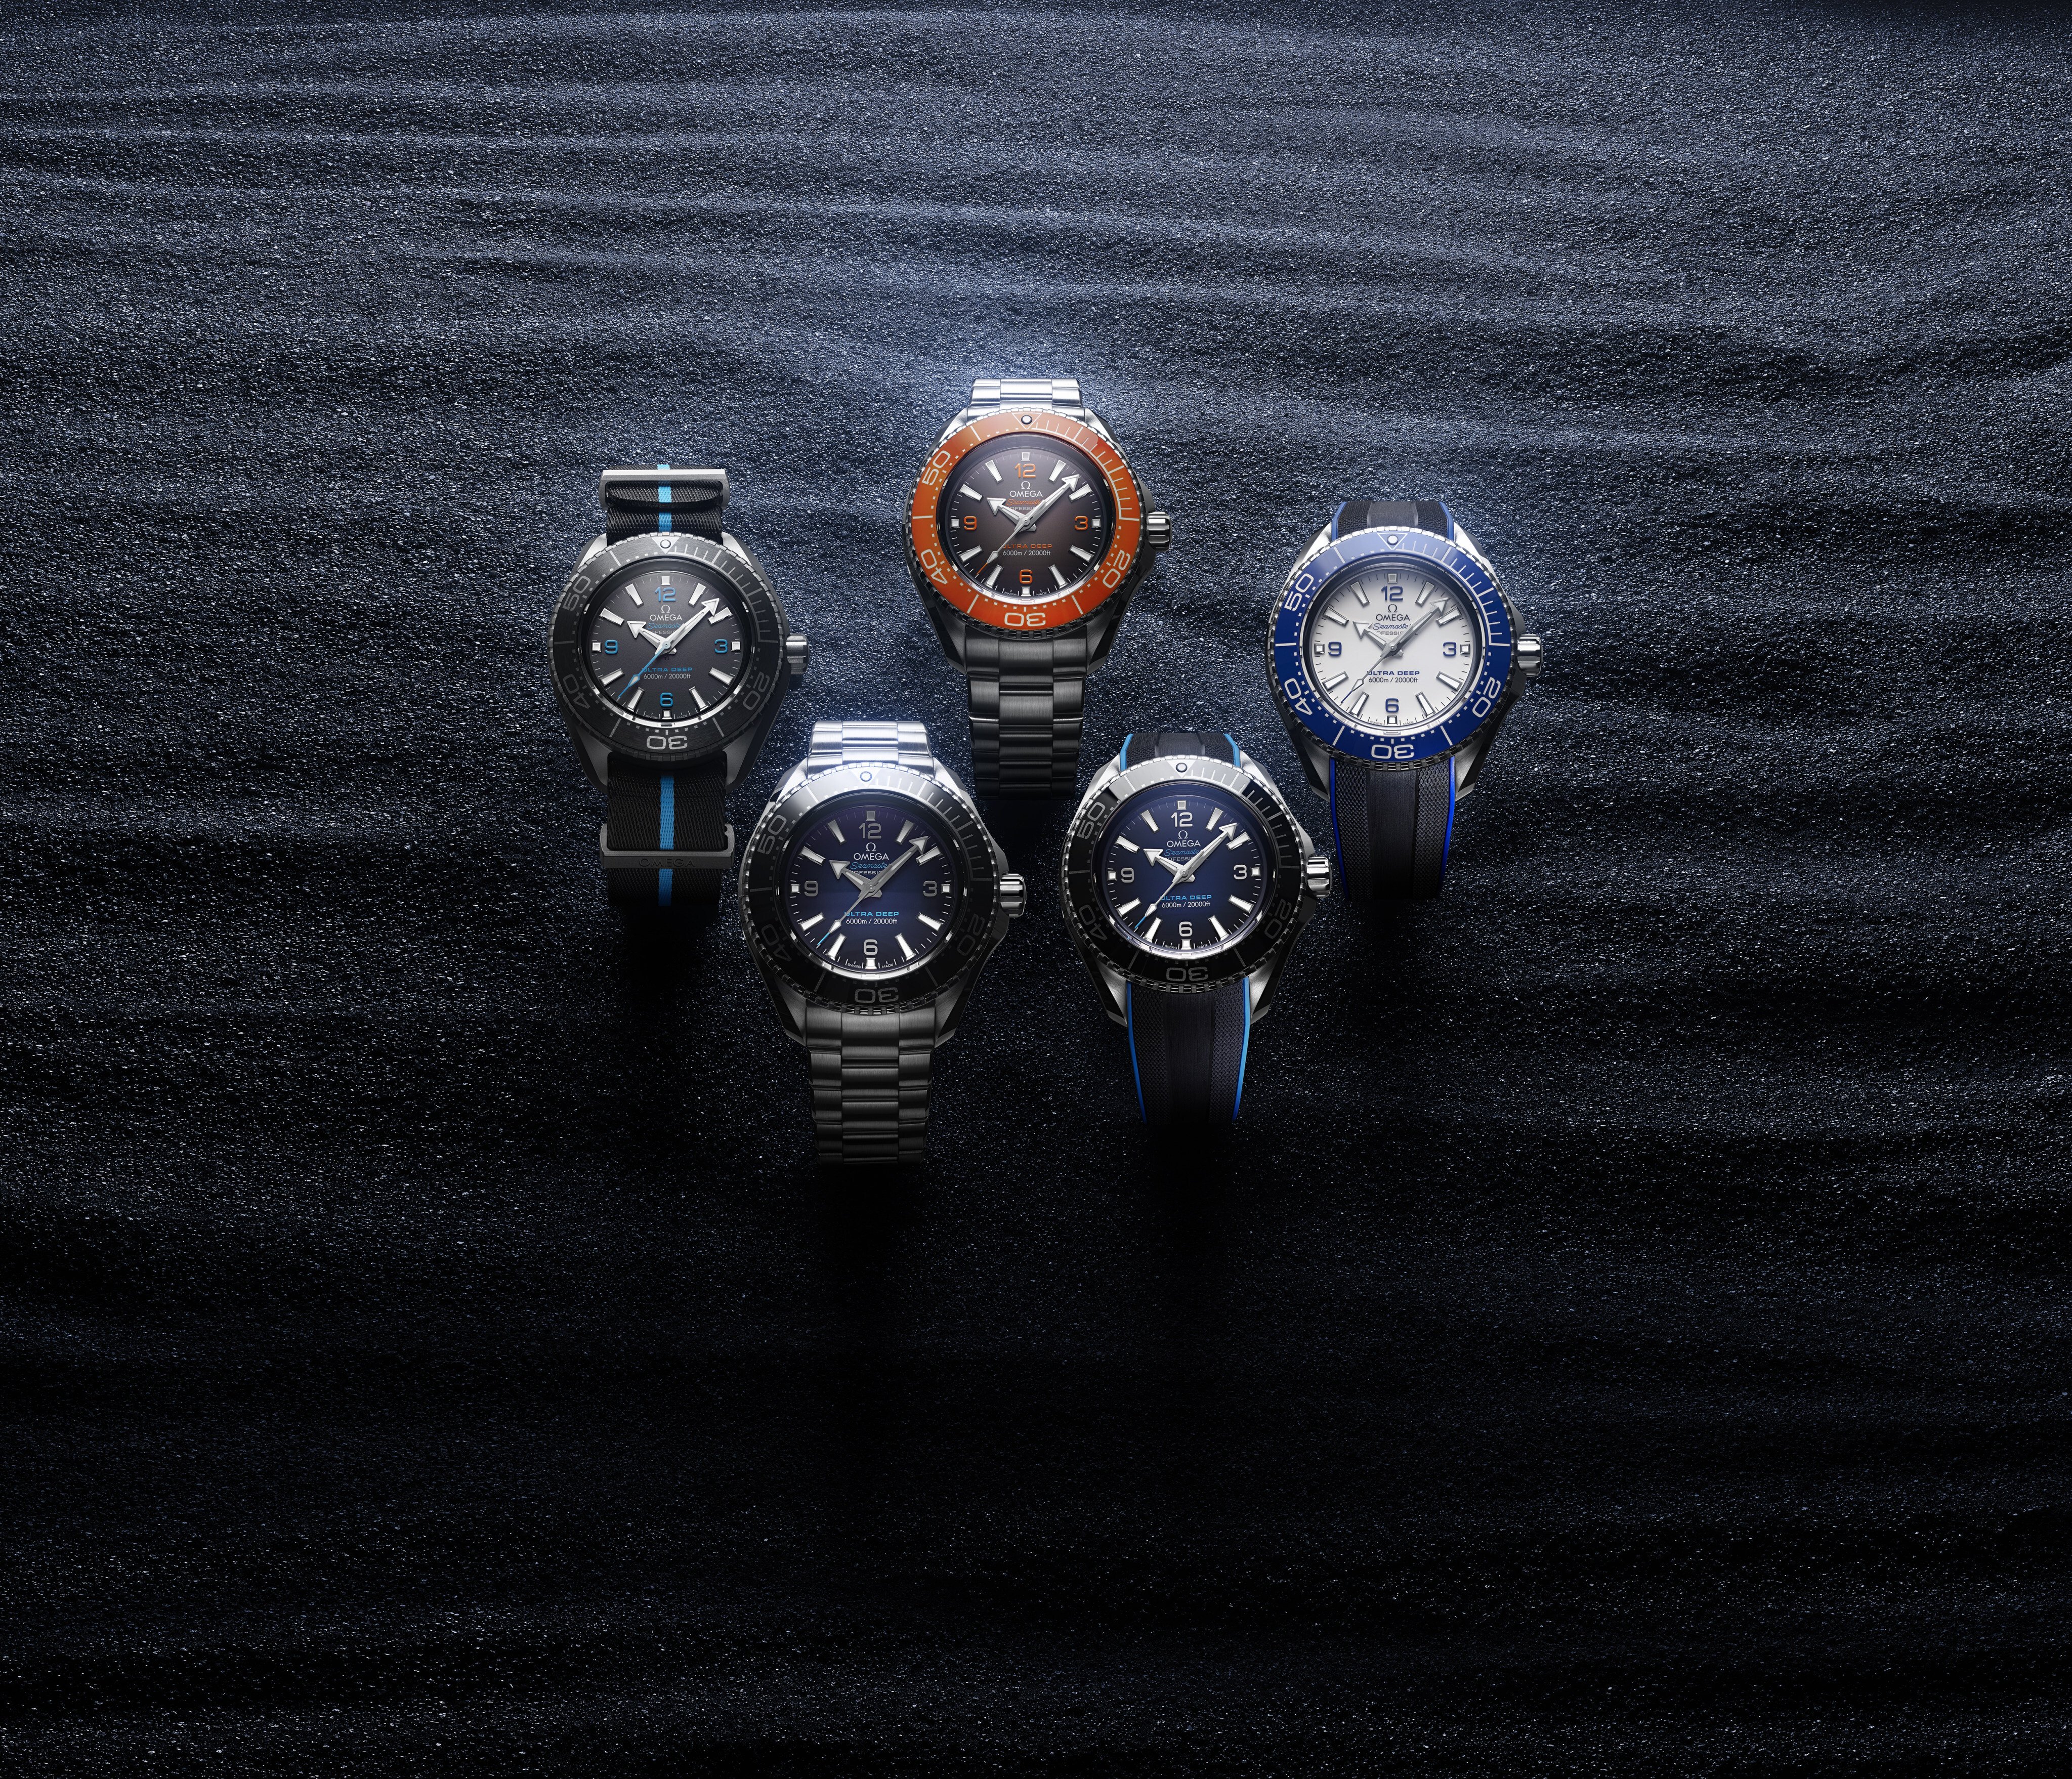 For 2022, Omega has announced new models in its Constellation, Speedmaster and Seamaster collections – including these Omega Seamaster Planet Ocean Ultra Deep watches. Photos: Omega